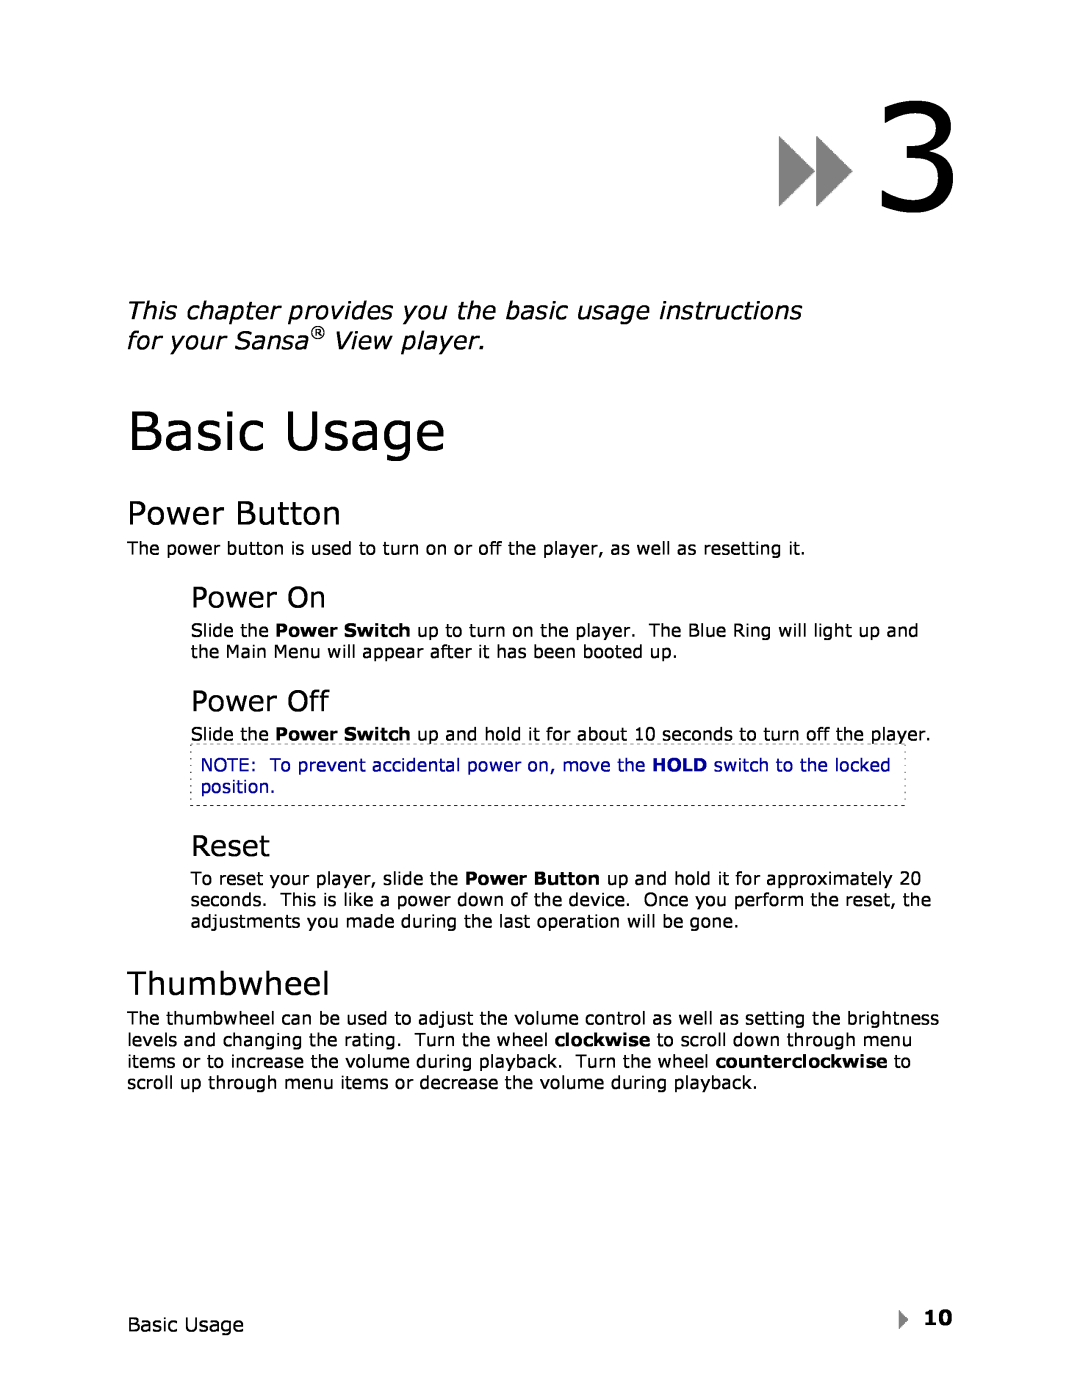 SanDisk View user manual Basic Usage, Power Button, Thumbwheel, Power On, Power Off, Reset 